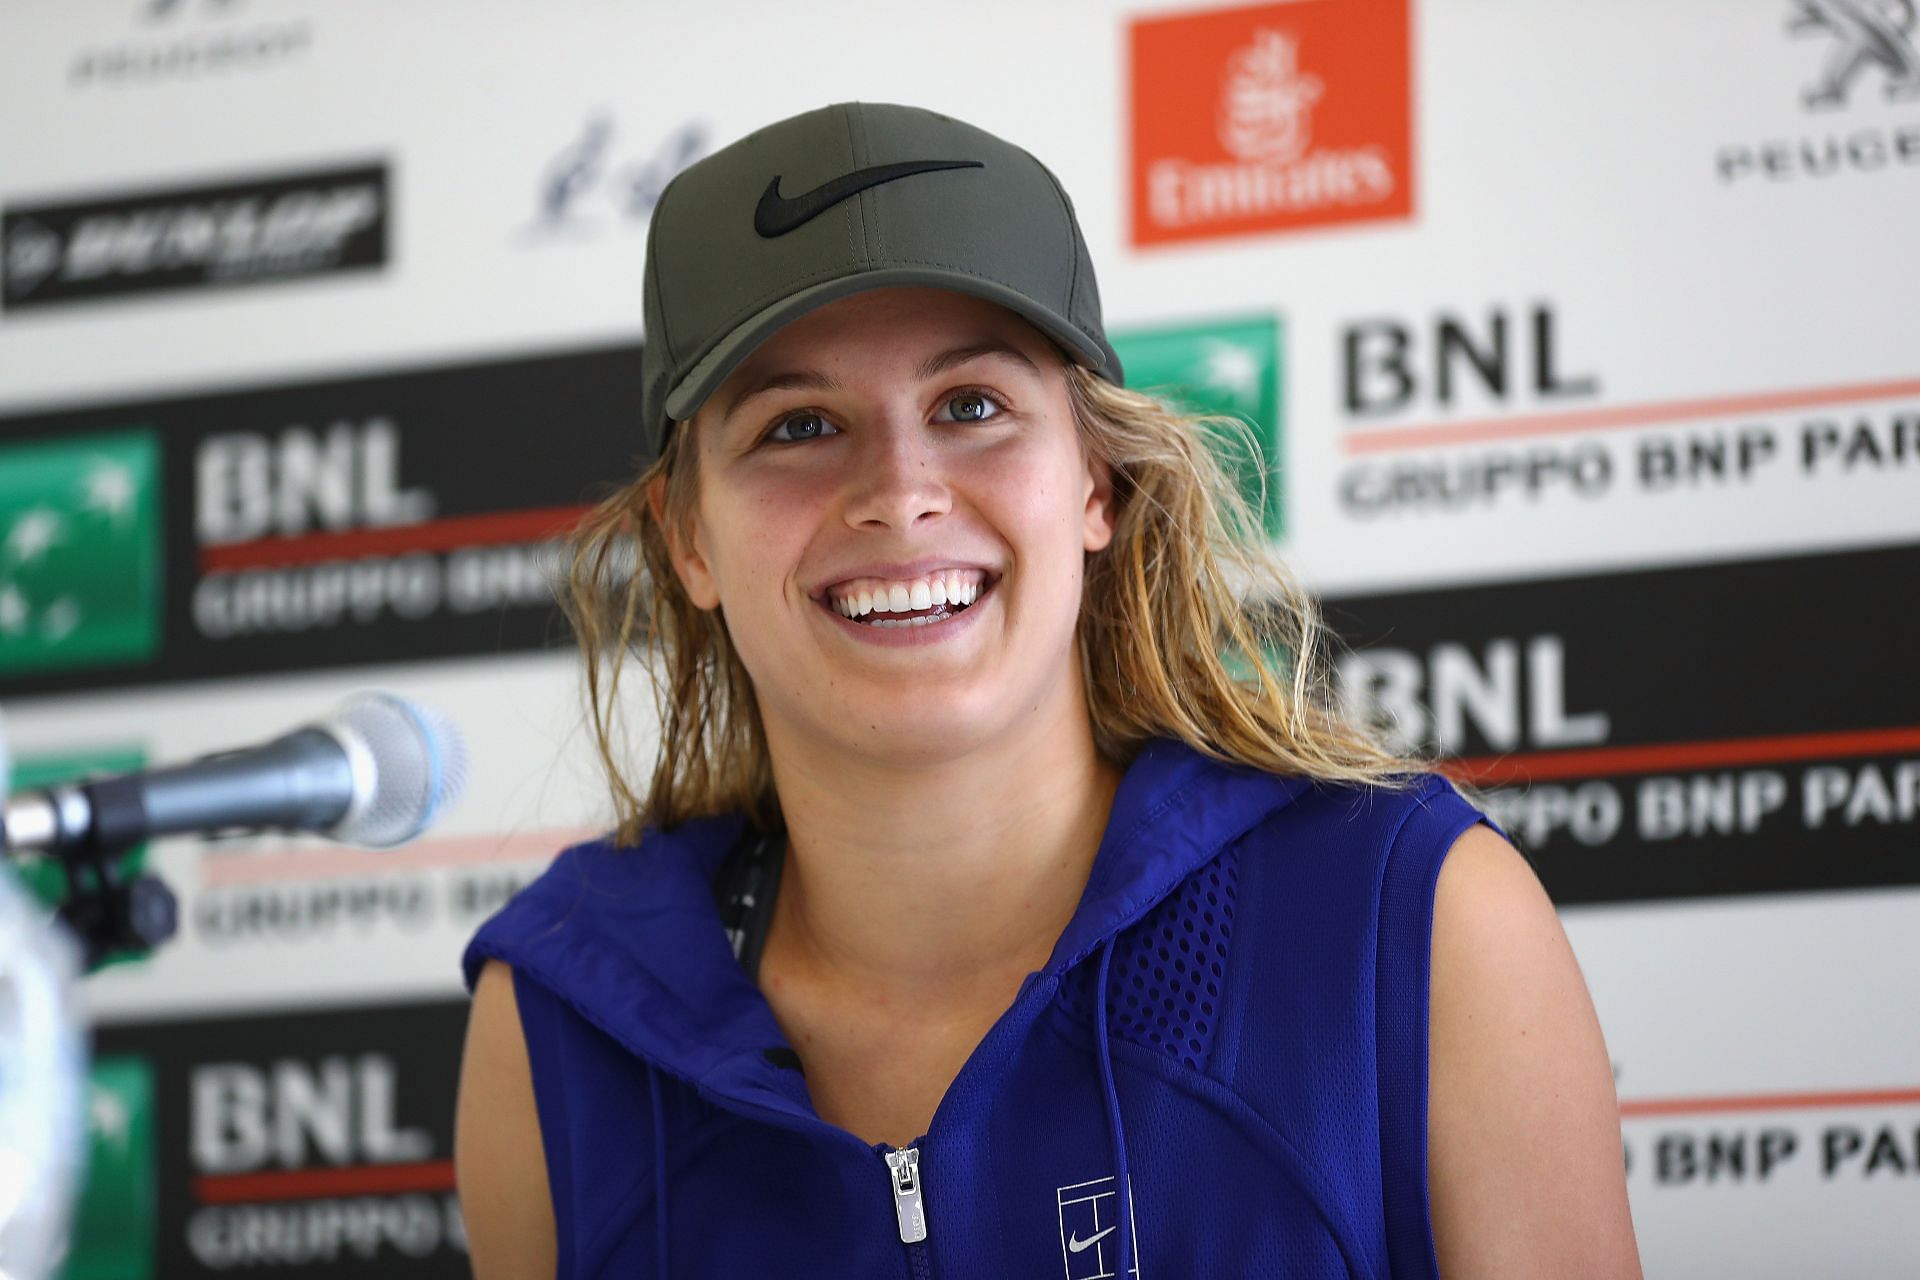 Eugenie Bouchard at a press conference